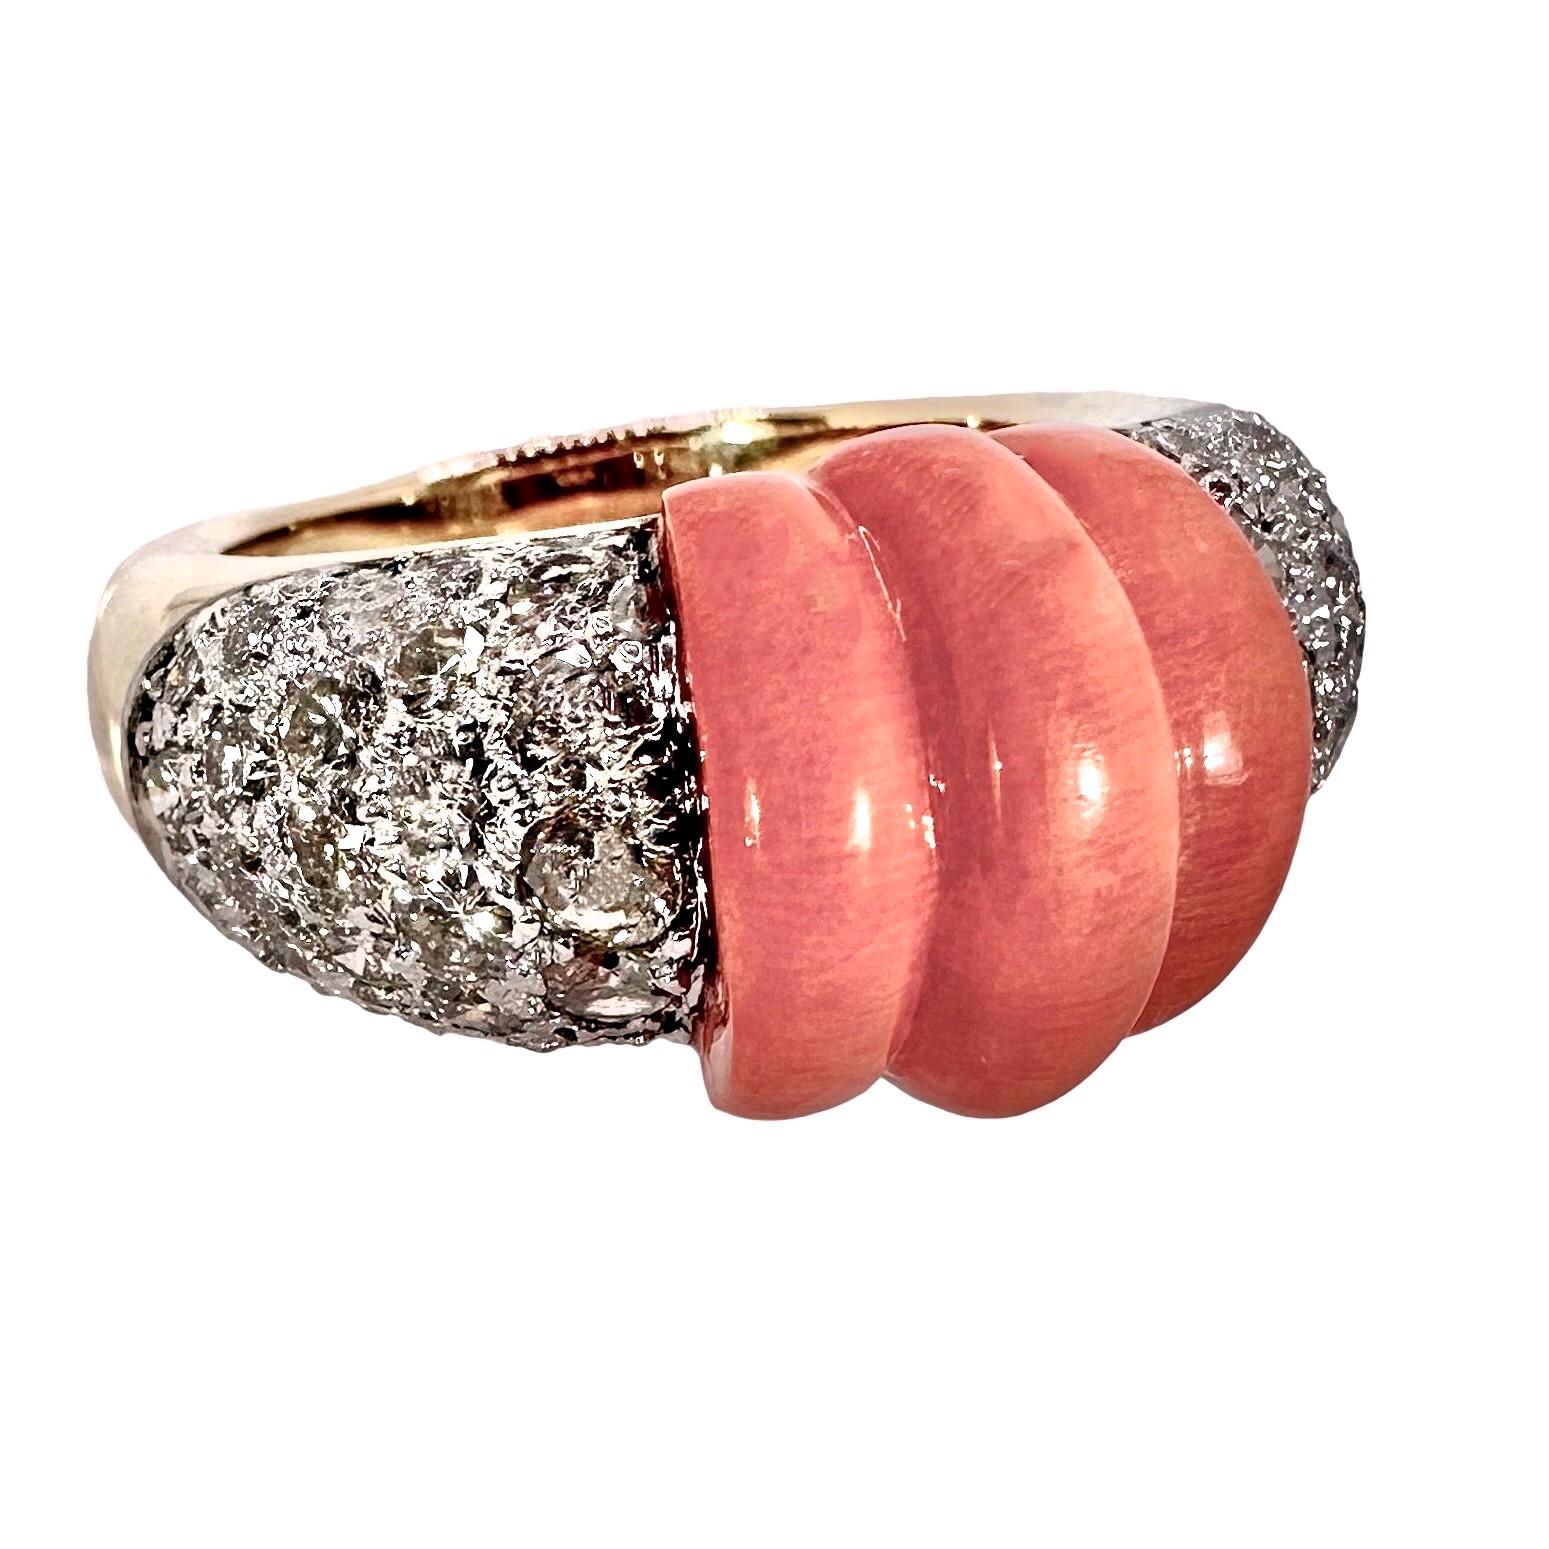 Modern Vintage Kutchinsky 18k Yellow Gold, Diamond and Fluted Coral Cocktail Ring * For Sale